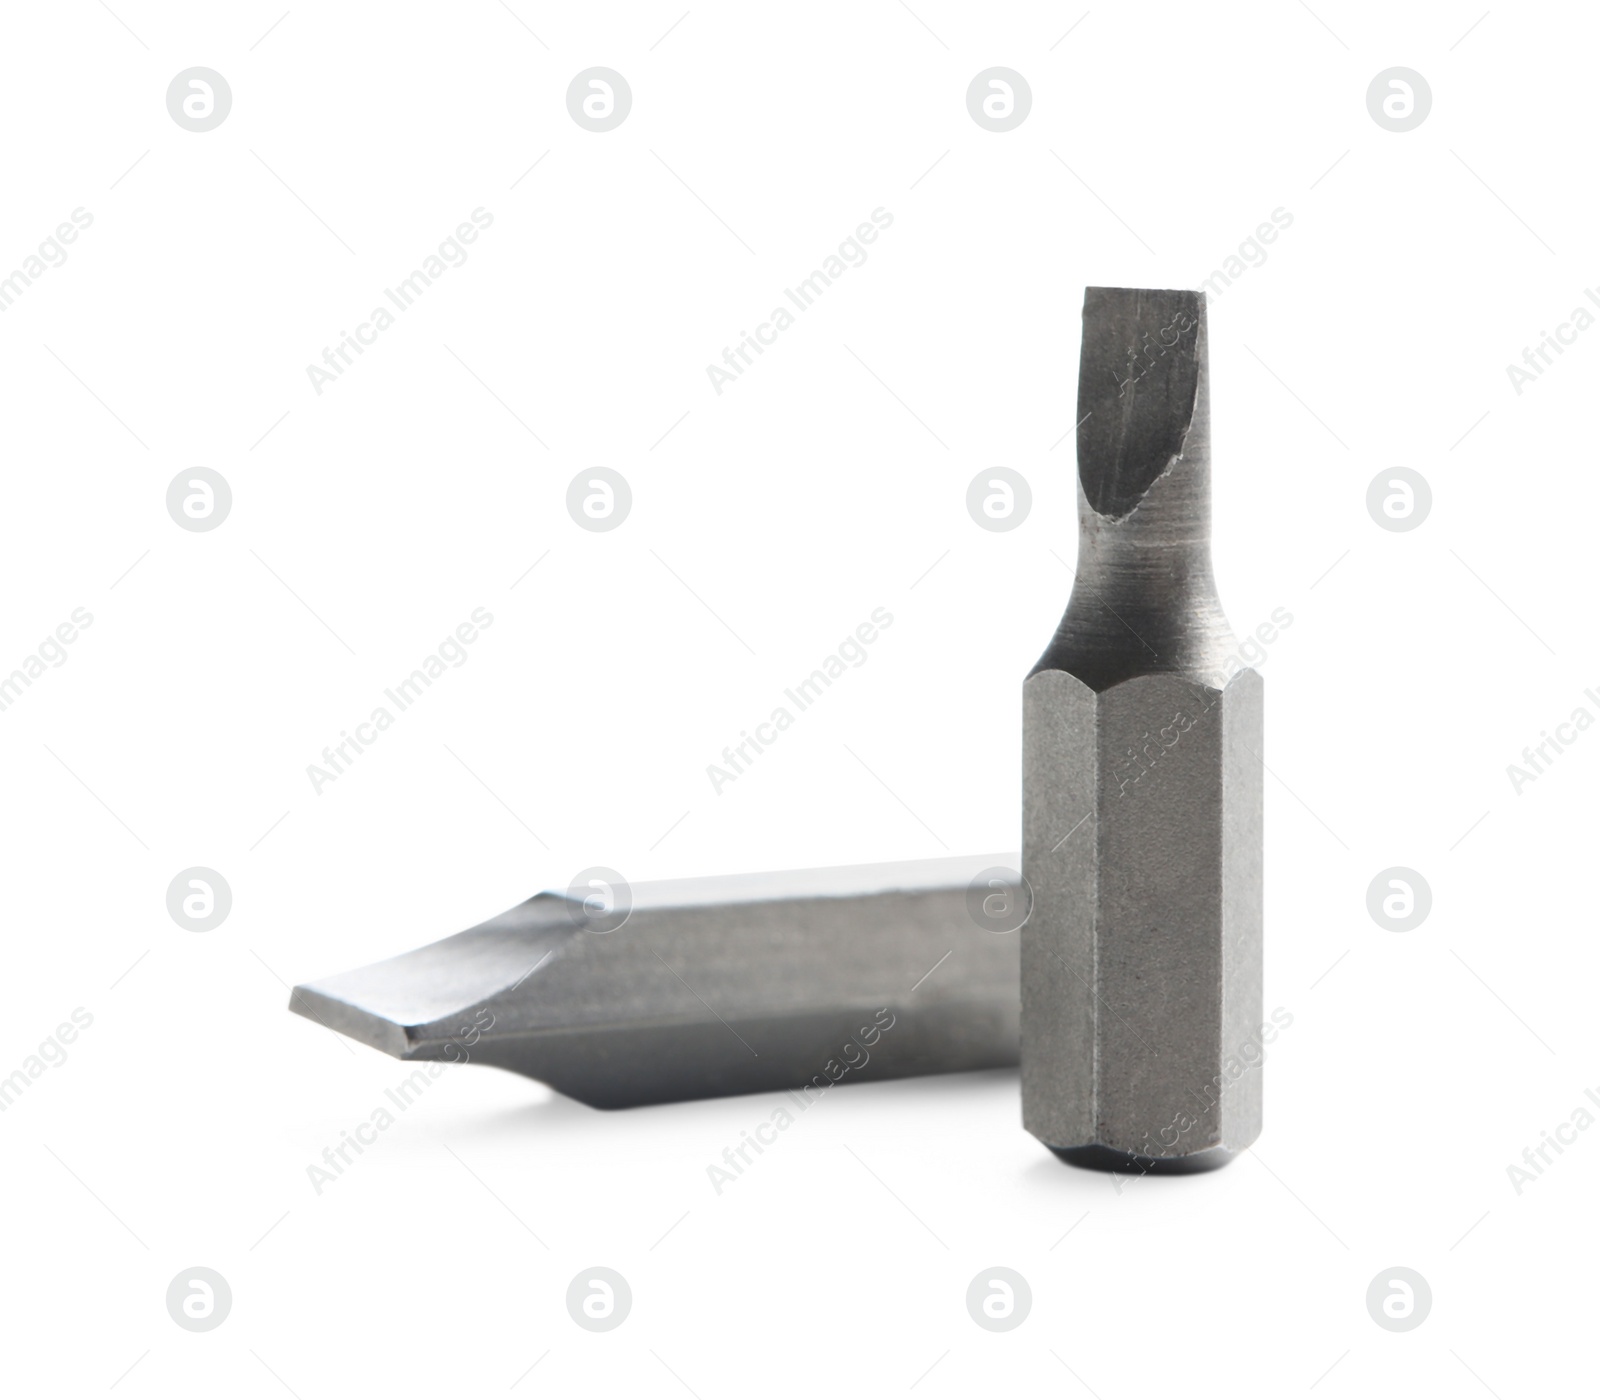 Photo of Two flathead screwdriver bits on white background